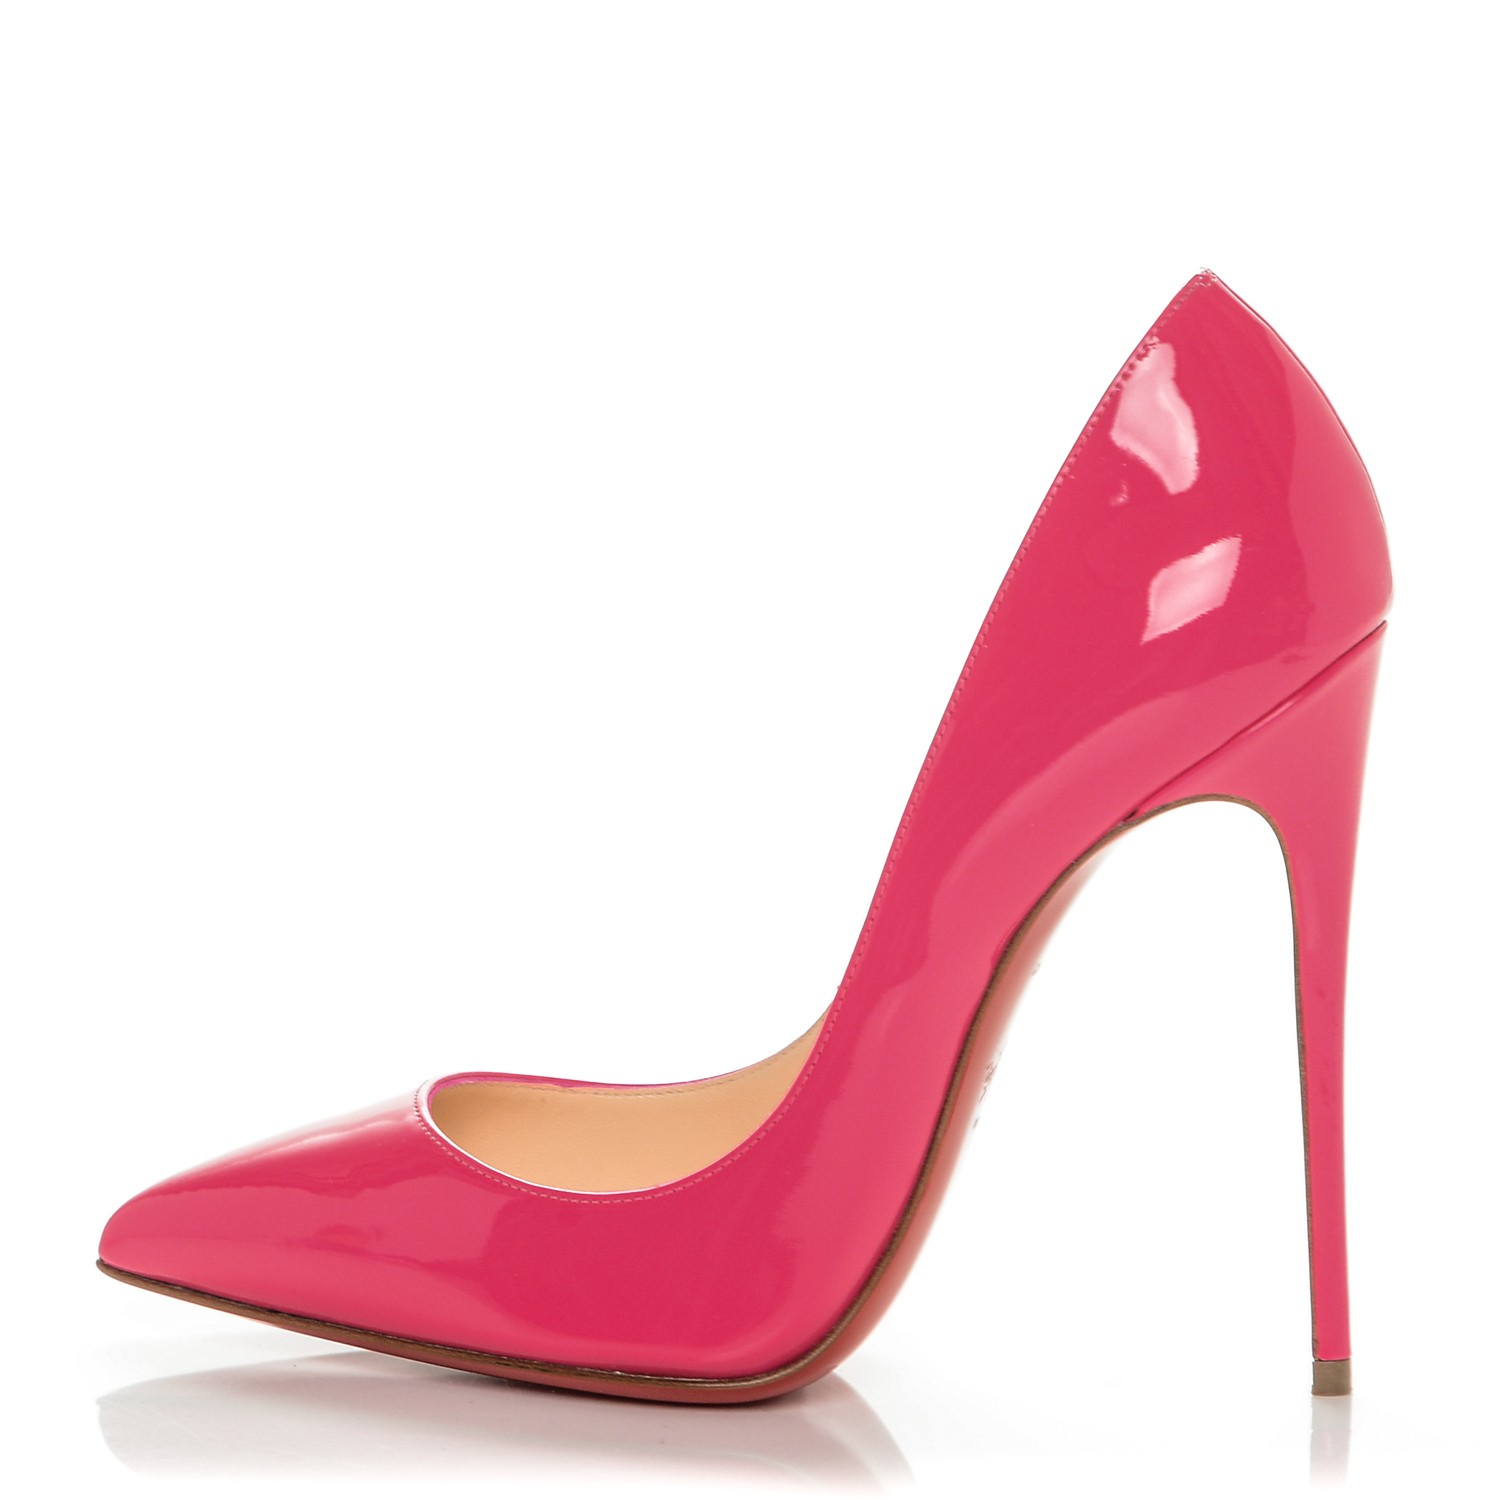 CHRISTIAN LOUBOUTIN Patent Pigalle Follies 120 Pumps 36 Pinky 188817